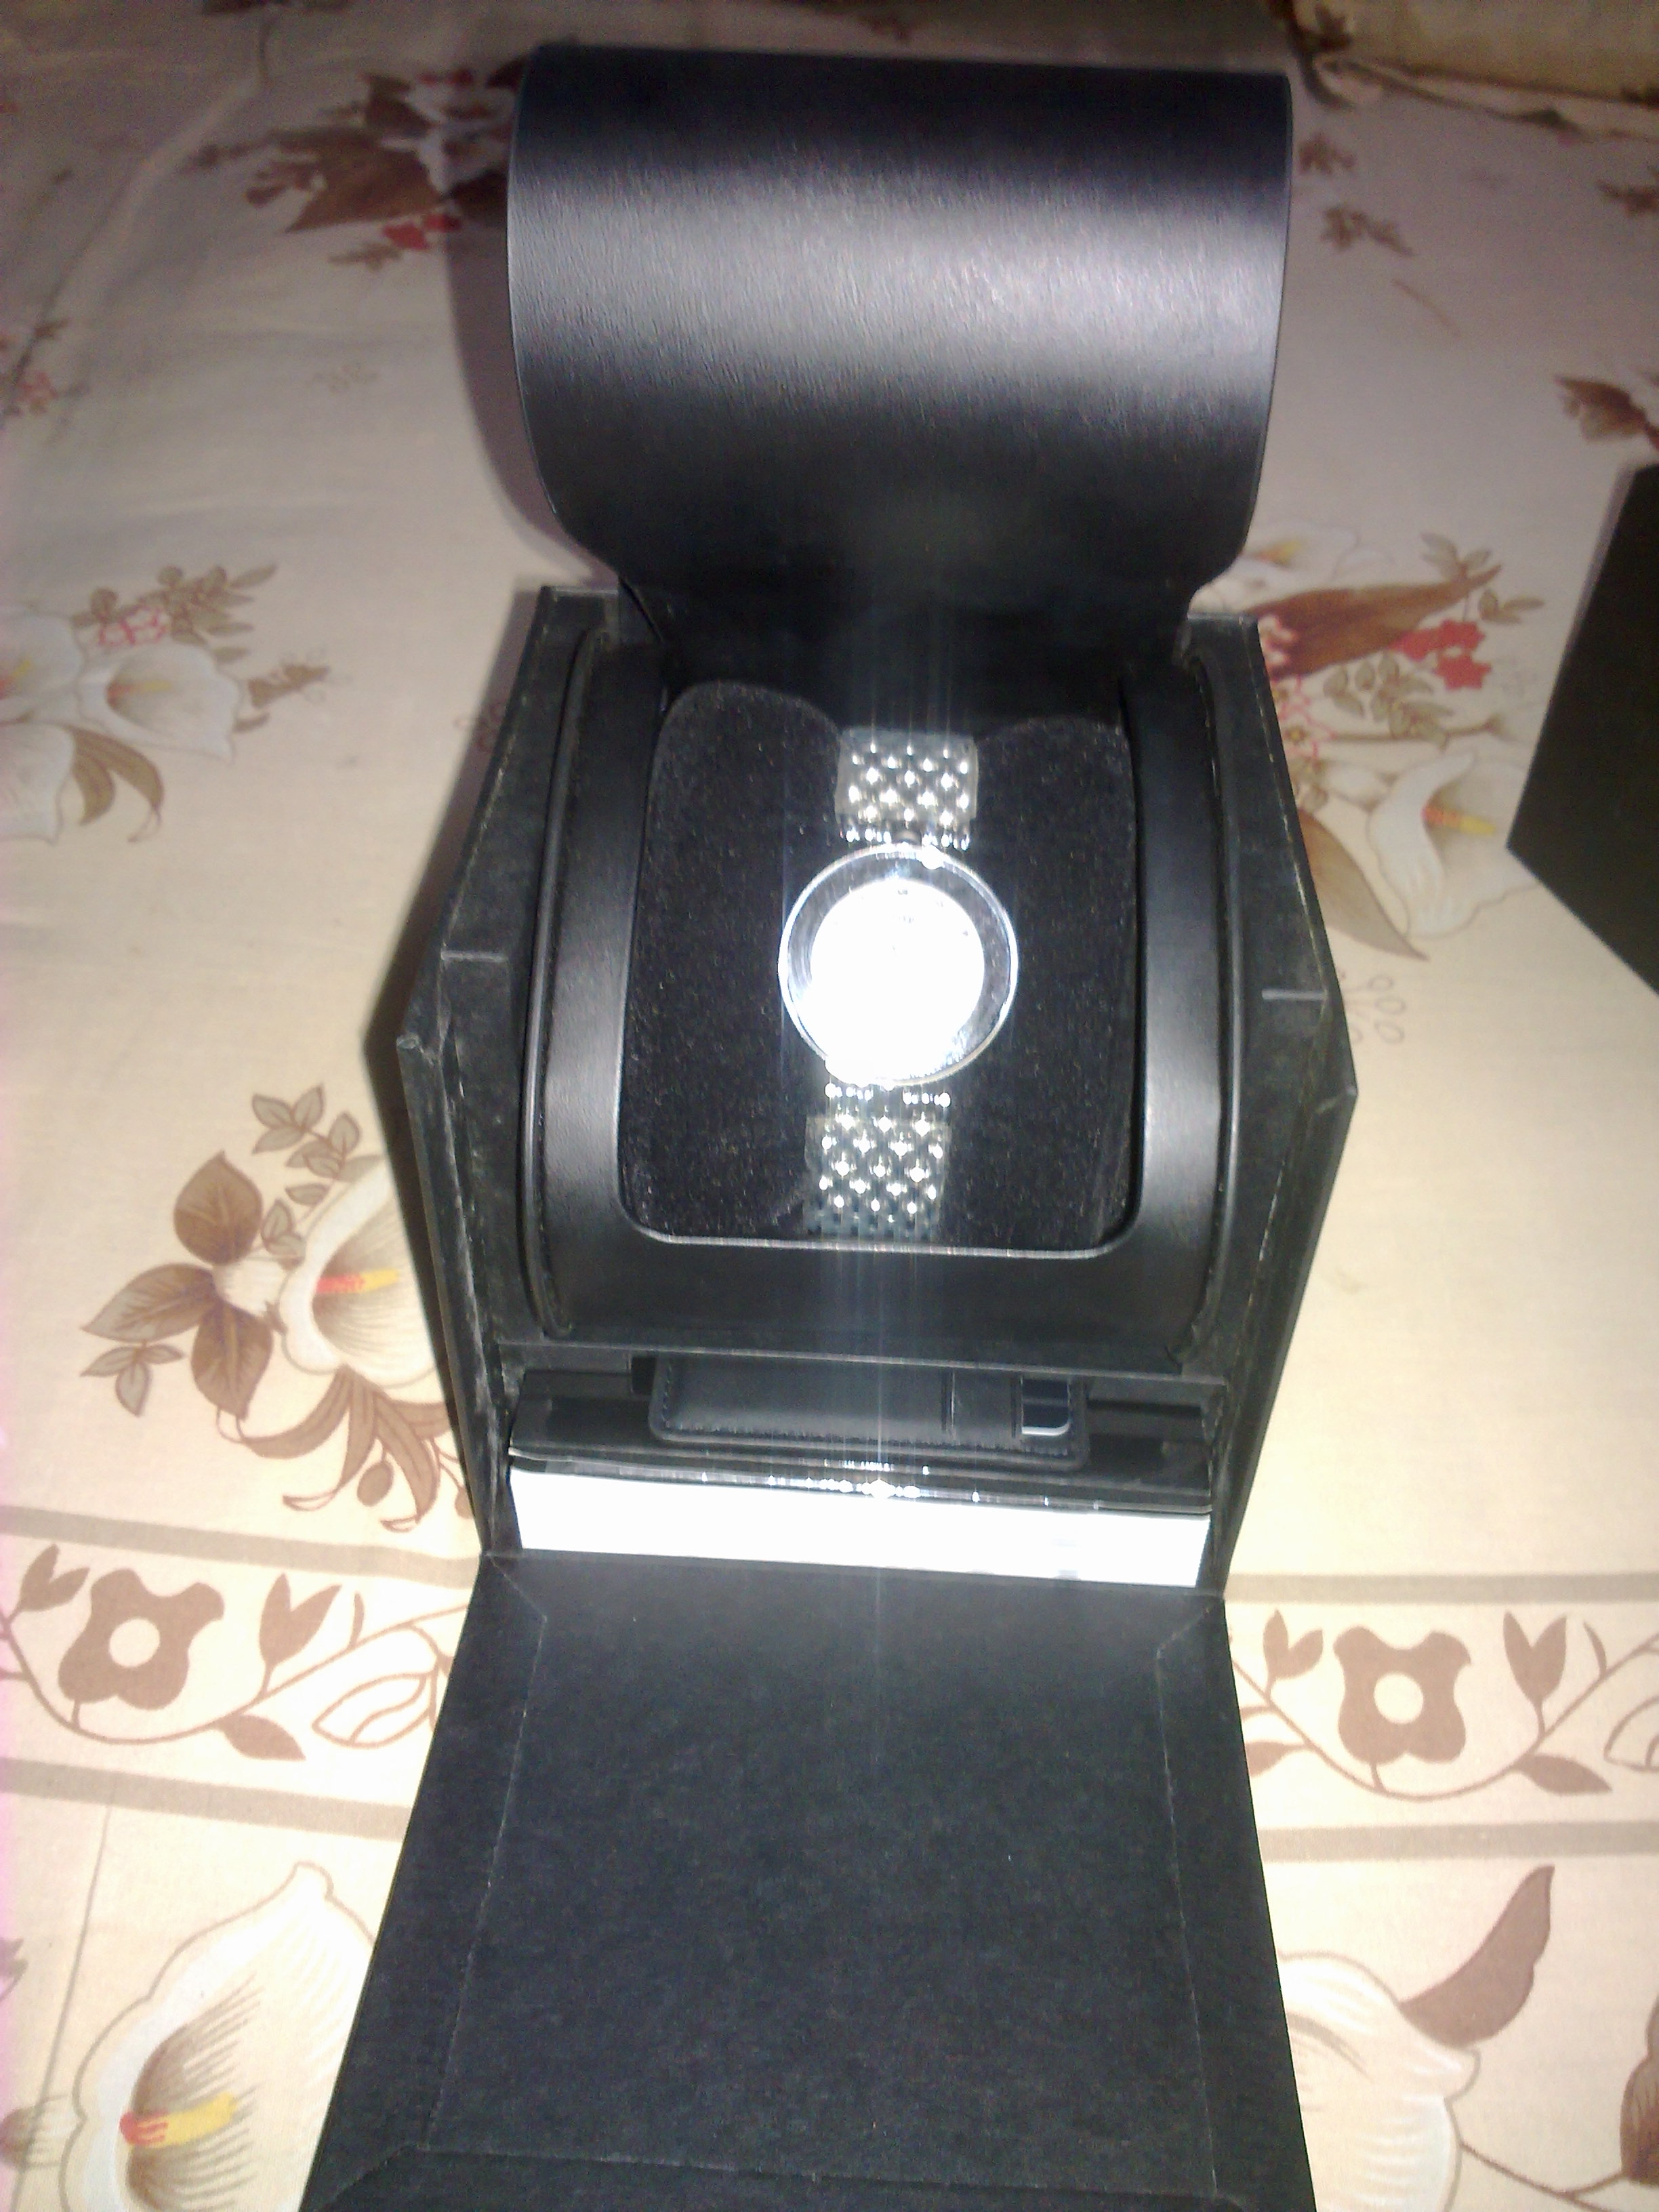 A new Rado Watch for sale.... Money is urjent...... large image 2